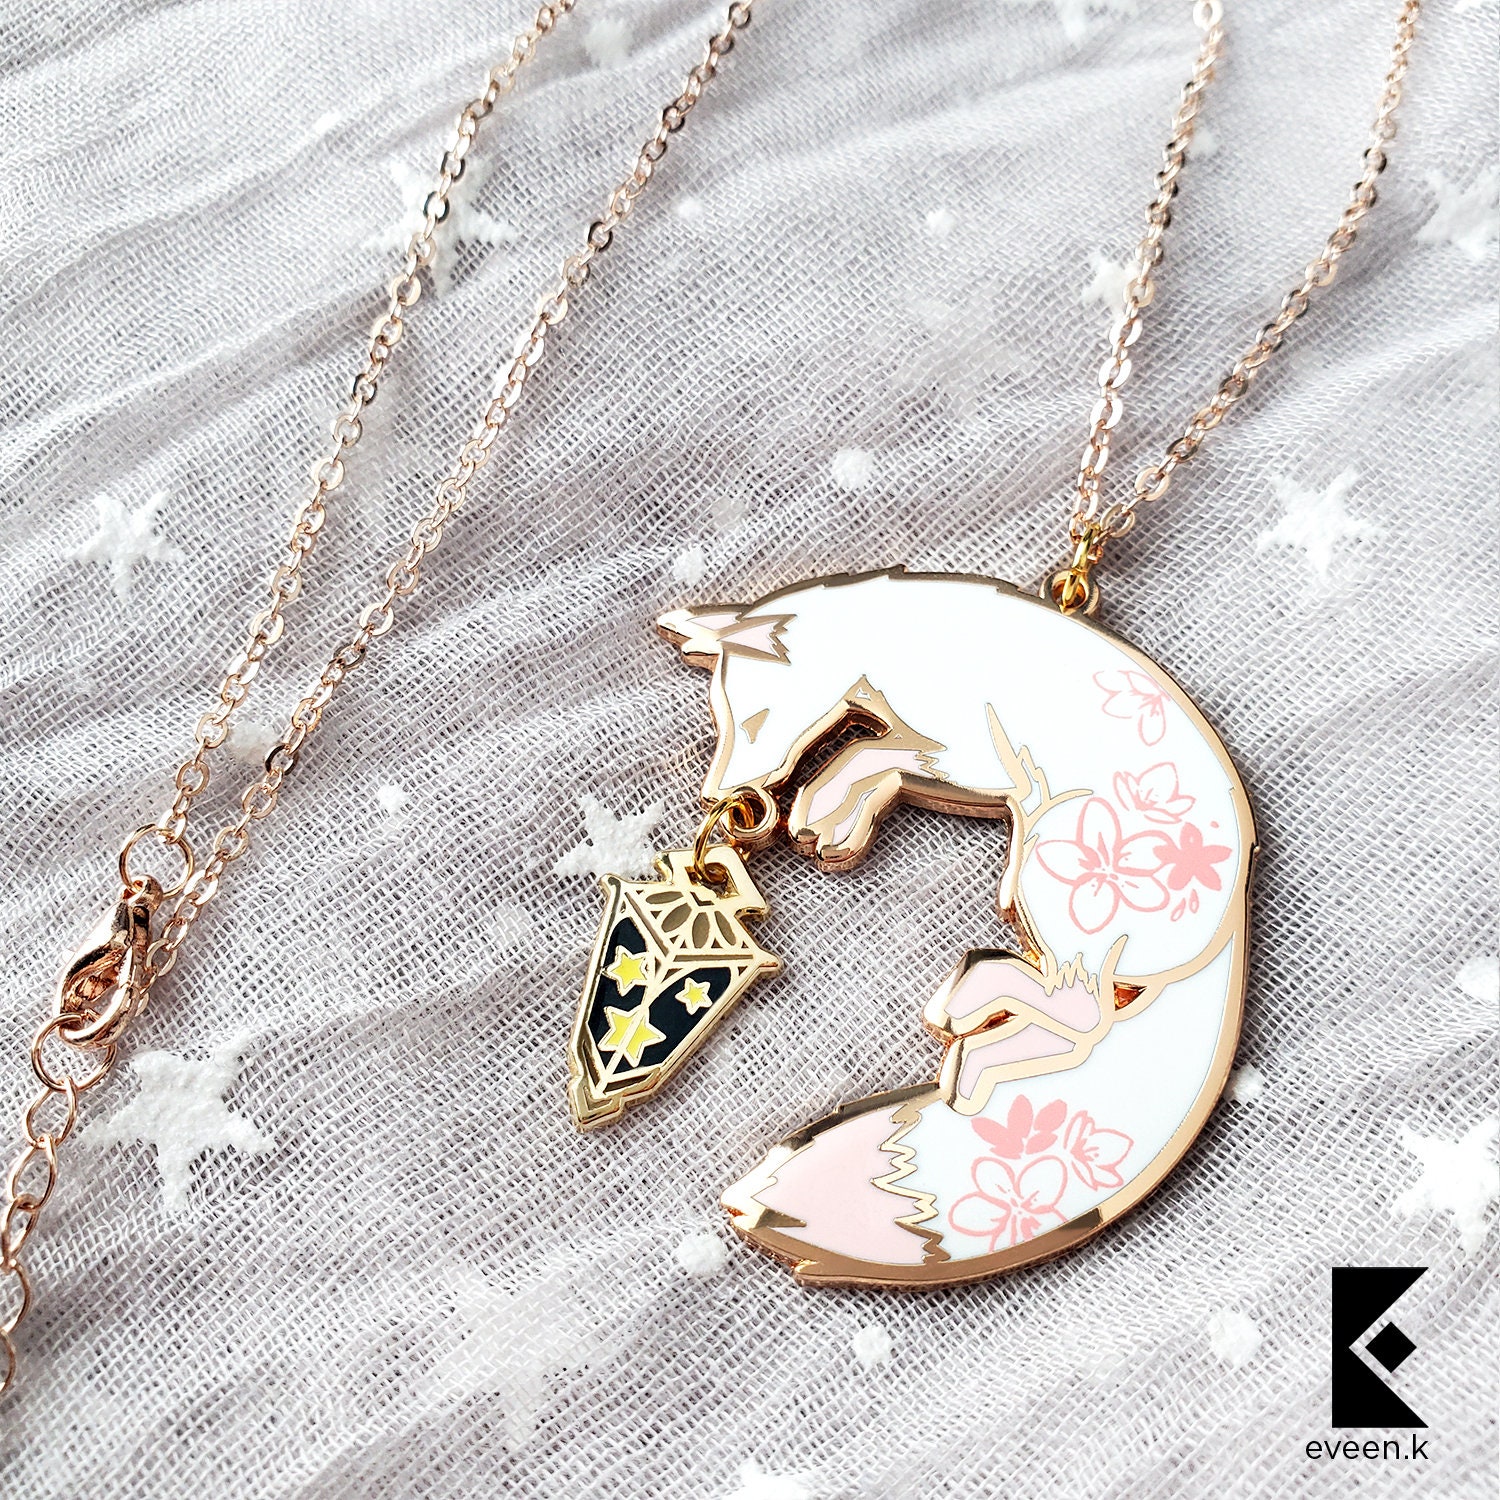 Star Carrier Enamel Necklace Glow in the Dark Pendant Animals with Lantern Stars Gold Silver Bee Cute Fantasy Forest Kawaii Accessory Chain